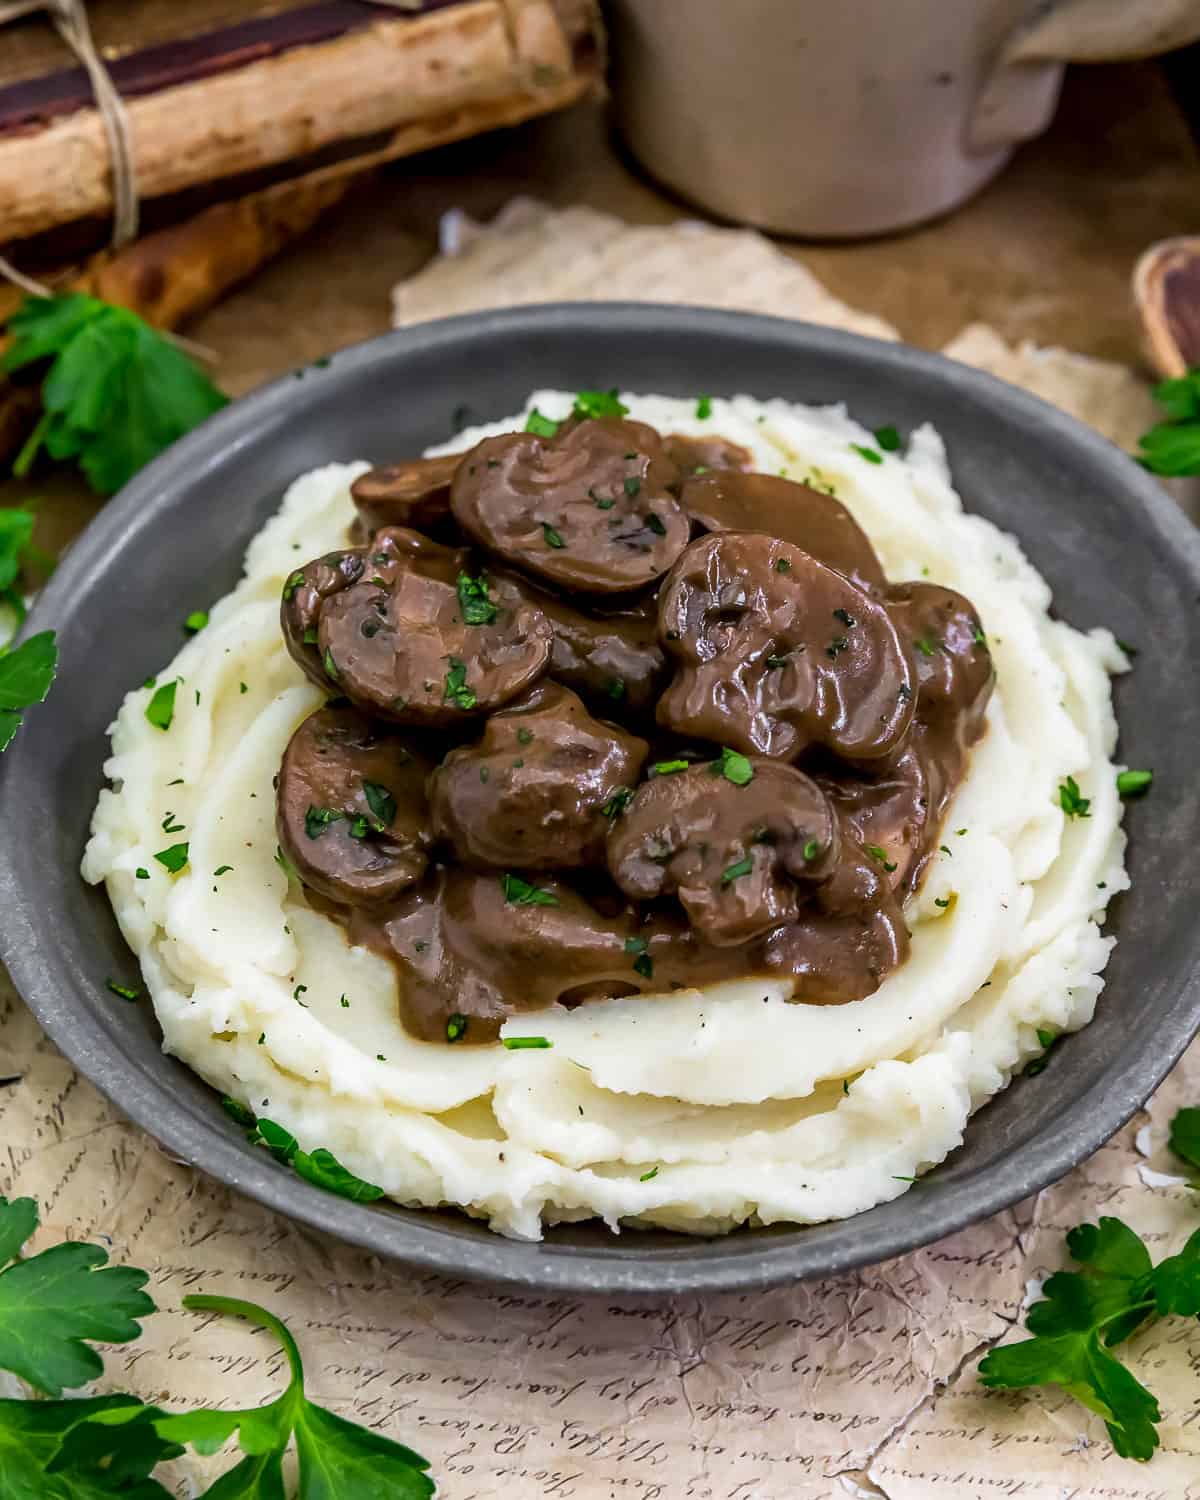 Vegan Steakhouse Mushrooms in Red Wine Sauce over mashed potatoes